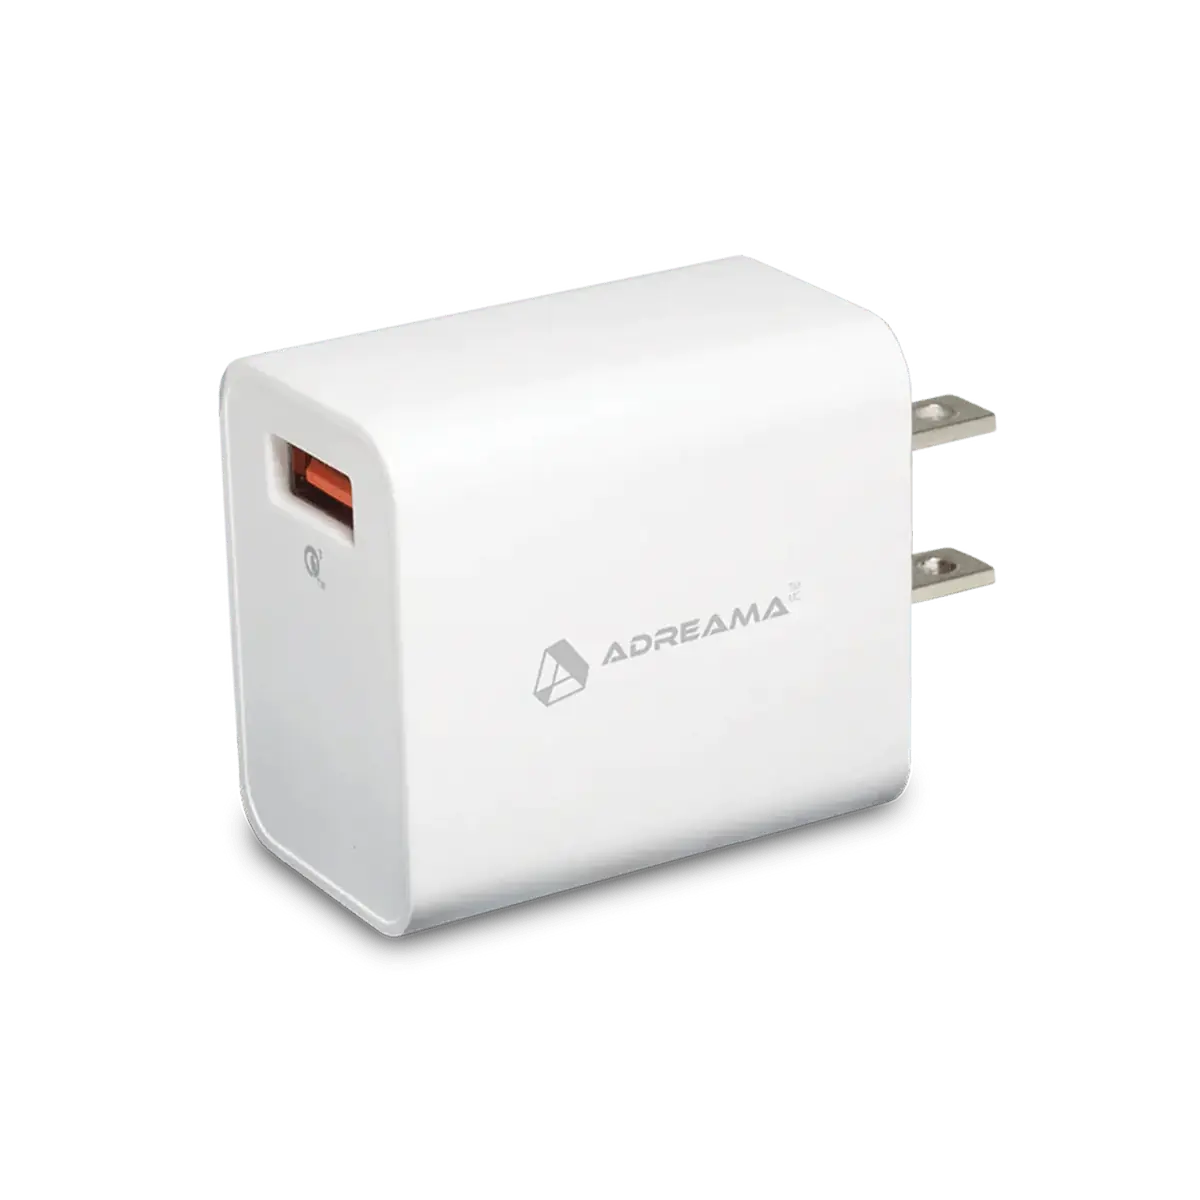 2. Fast Charging Made Easy with Adreama's QC 3.0 18W Wall Charger